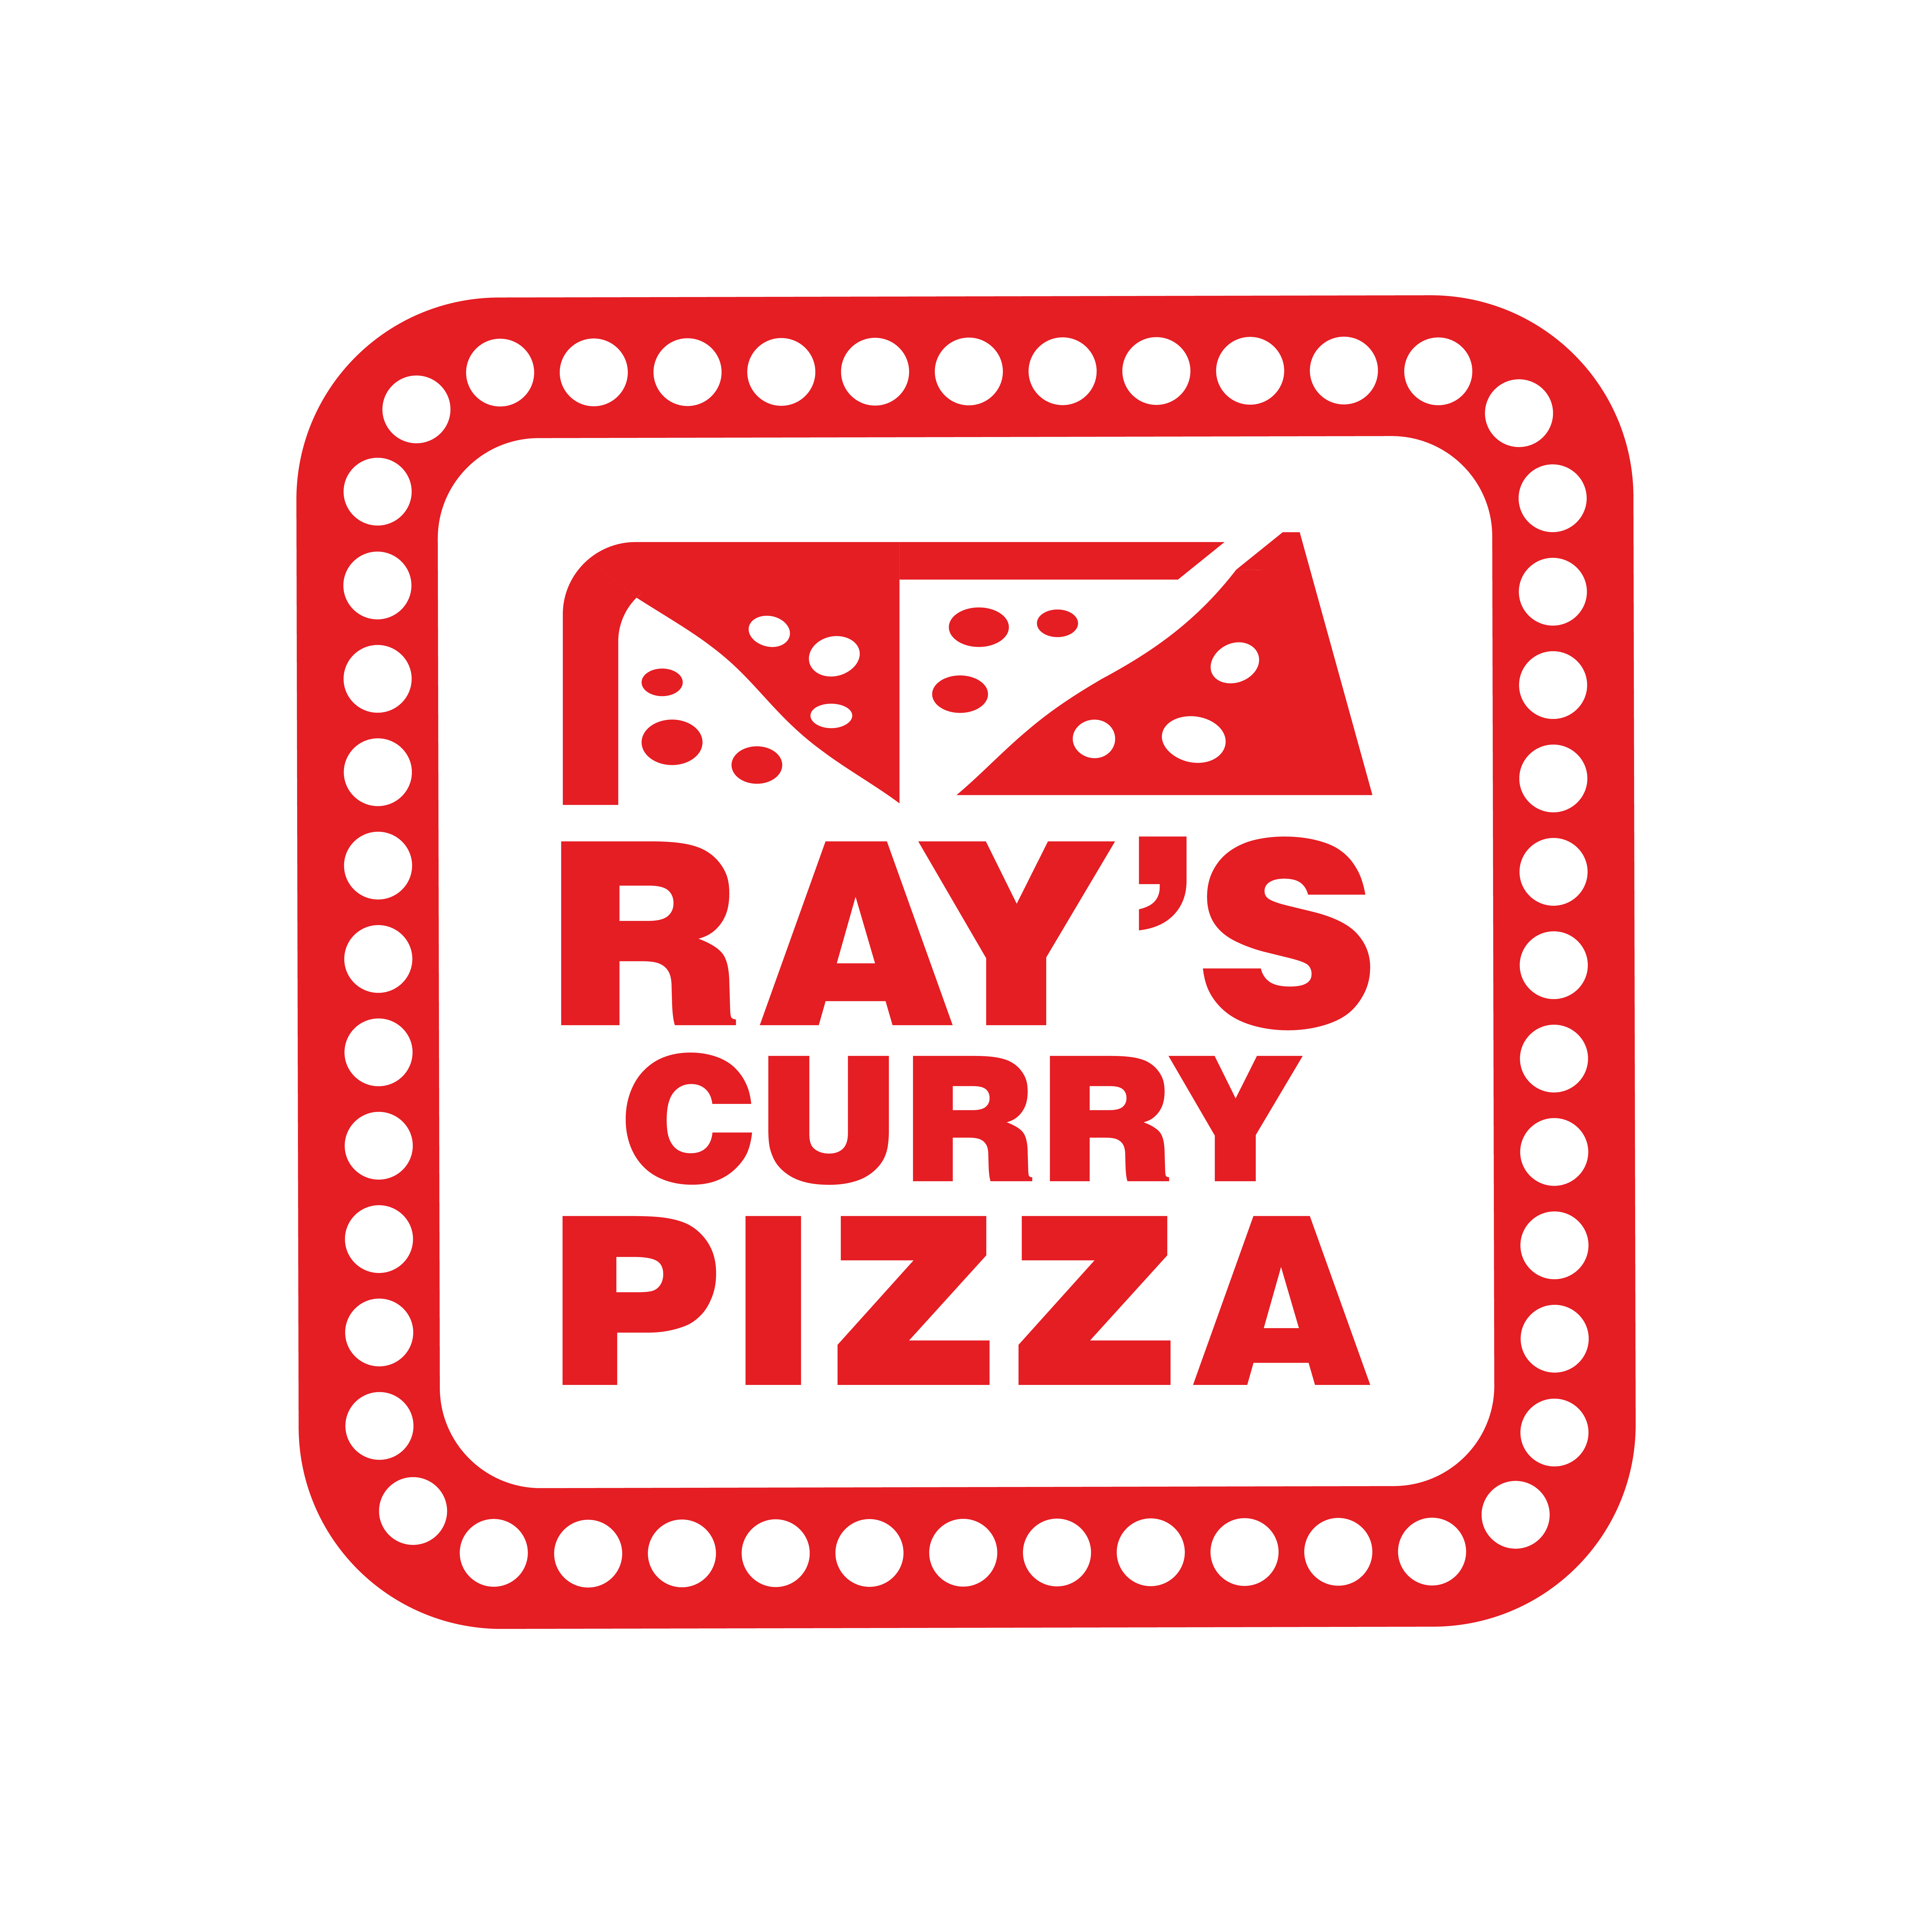 Rays Curry Base Pizza